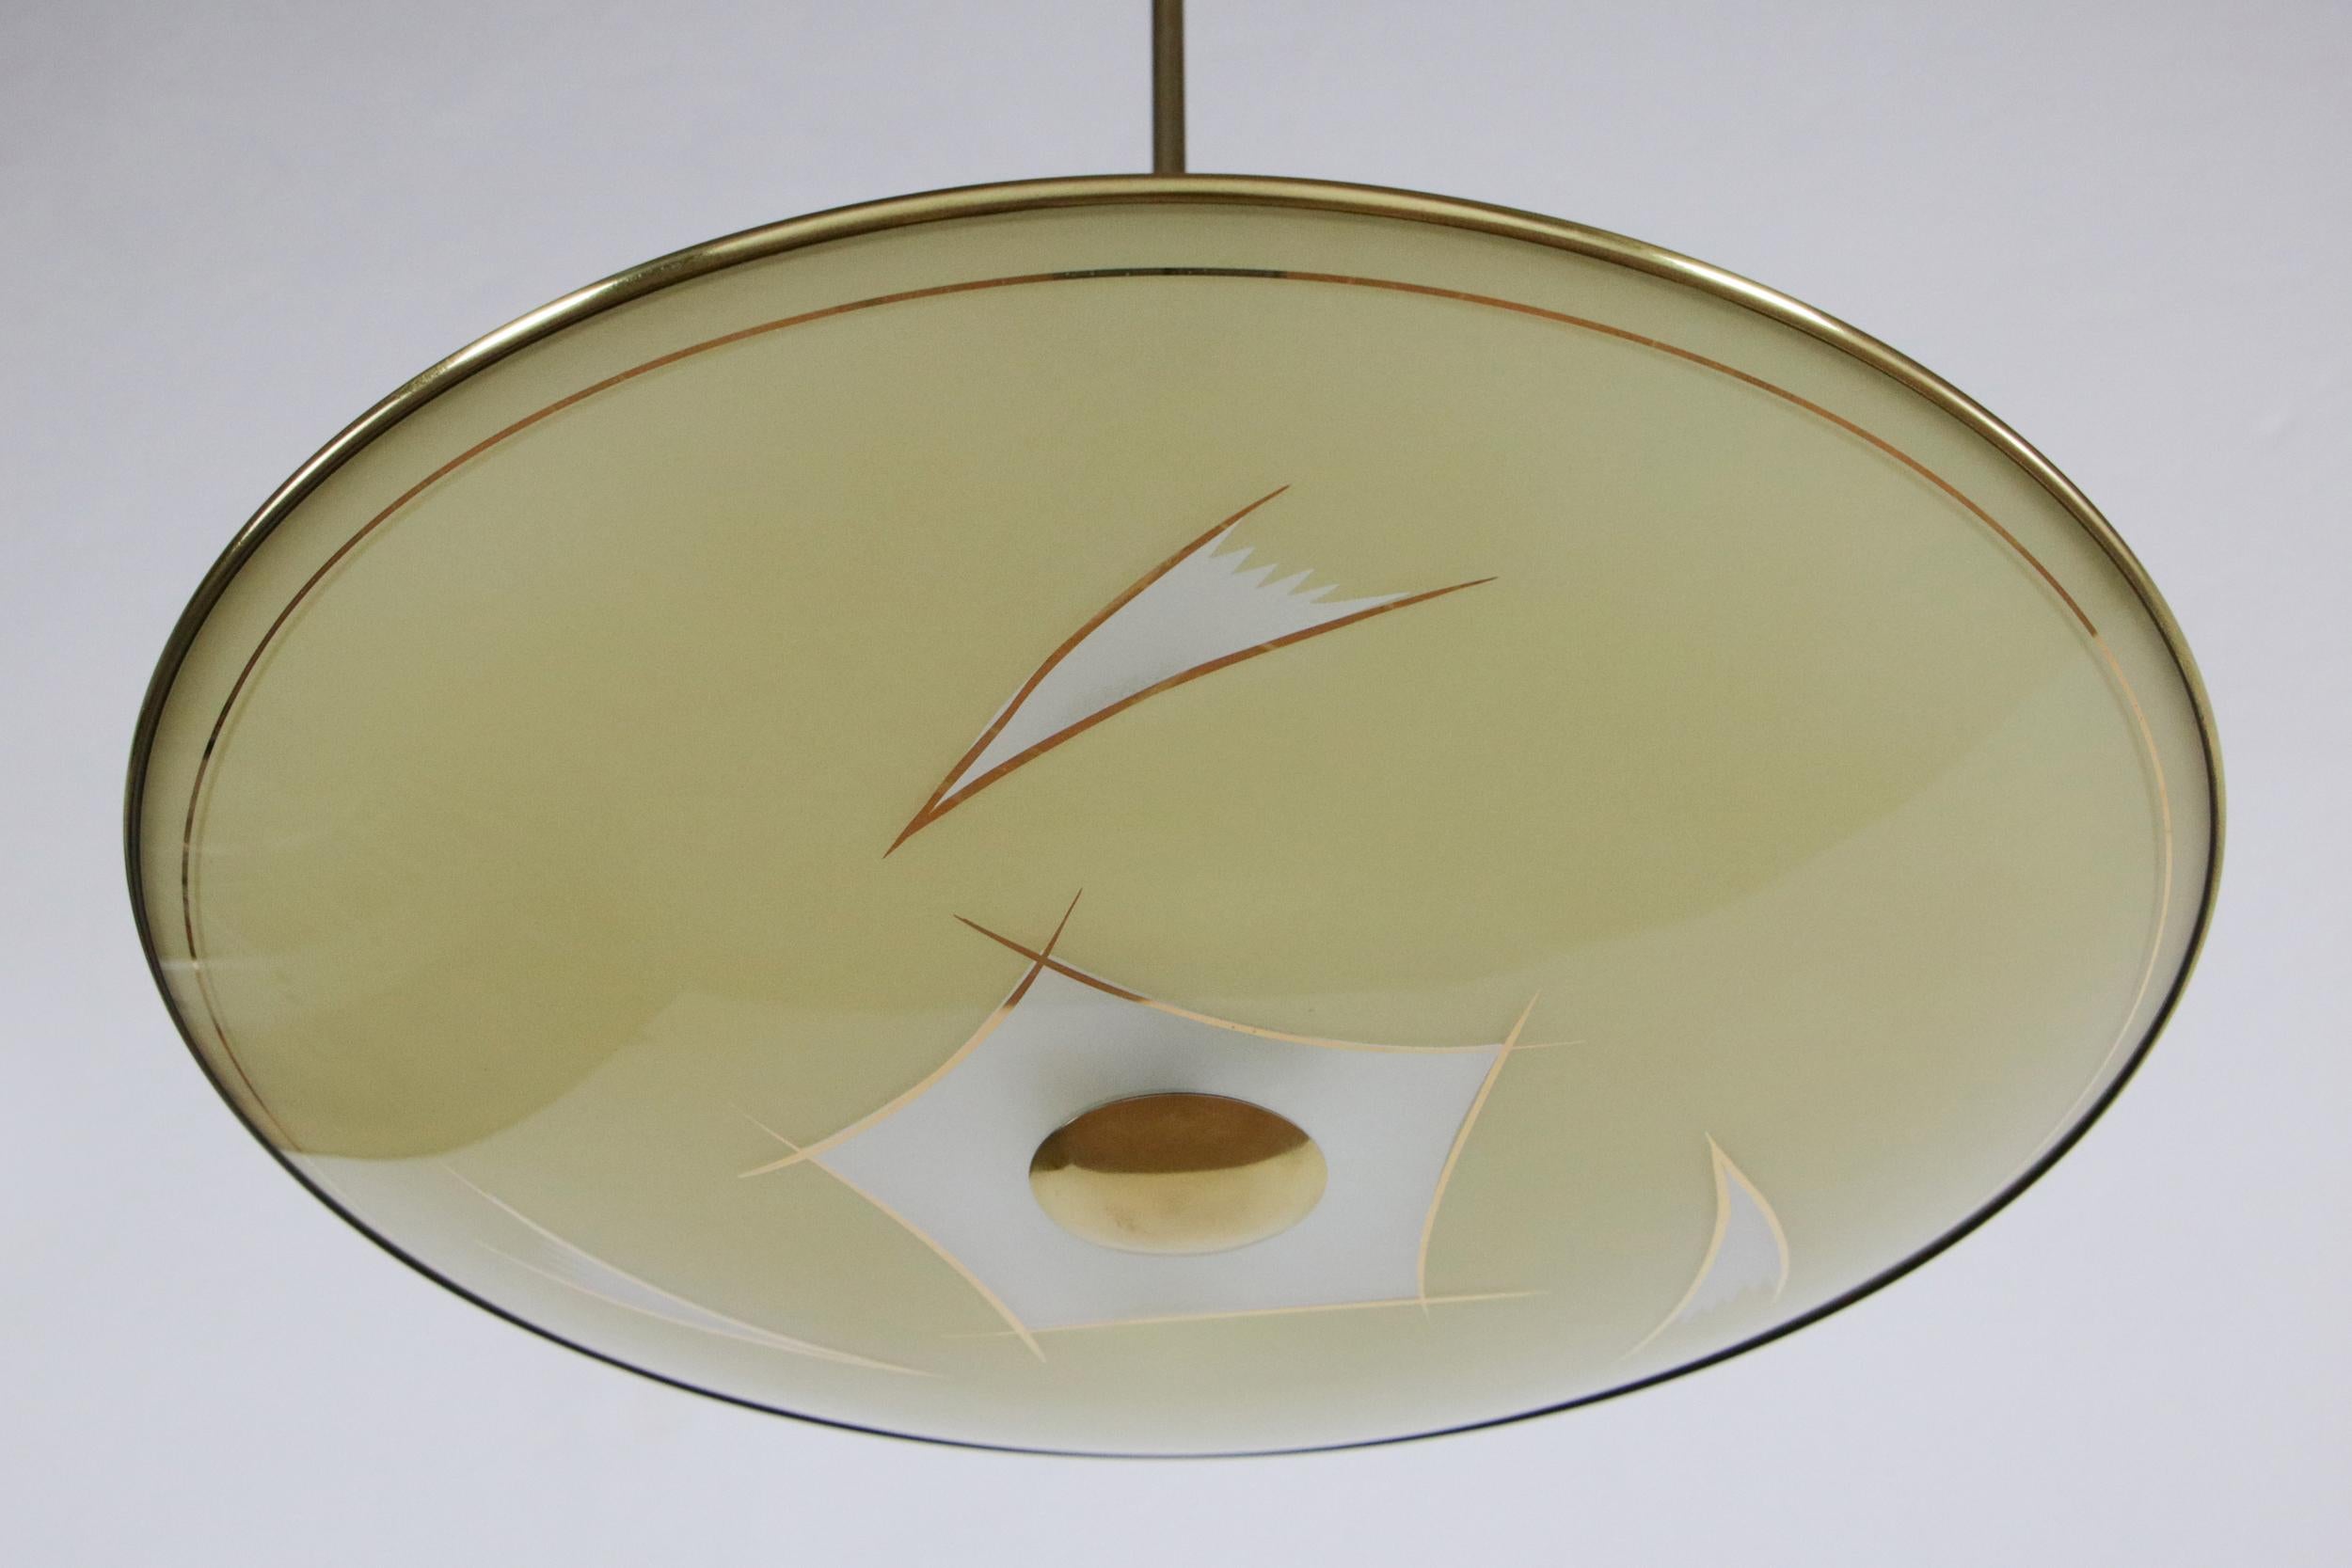 This beautiful Italian Mid-Century Modern disc chandelier or pendant lamp is made of brass and sandblasted glass. It has two lights of E14 format. The delicate hand drawings are what give this lamp such a distinctive character. We recommend viewing